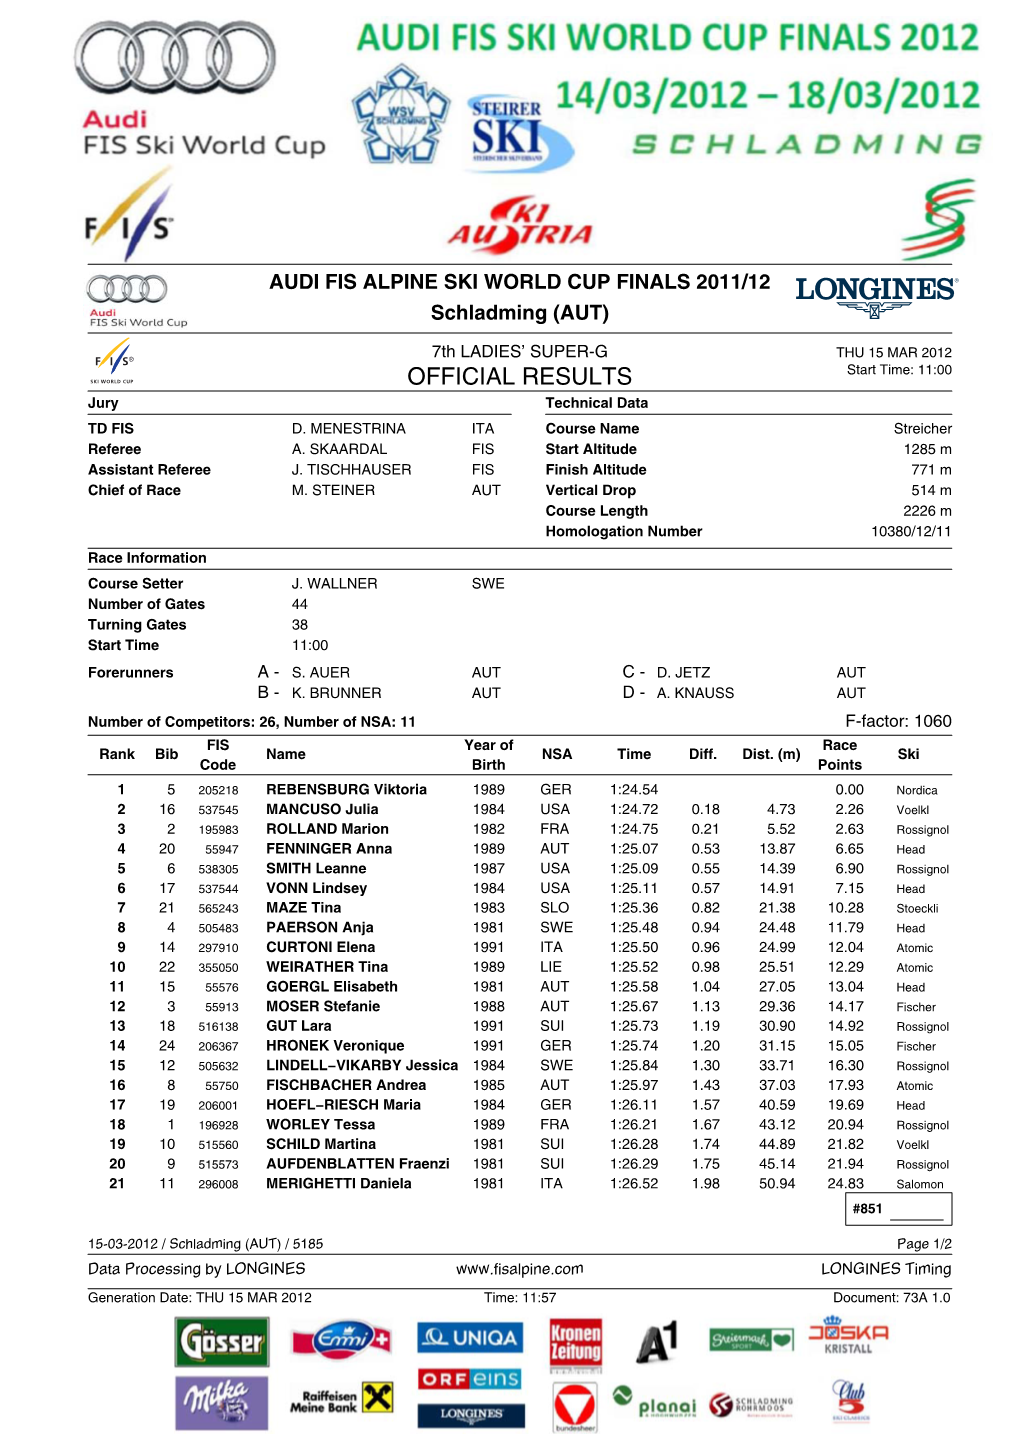 OFFICIAL RESULTS Start Time: 11:00 Jury Technical Data TD FIS D